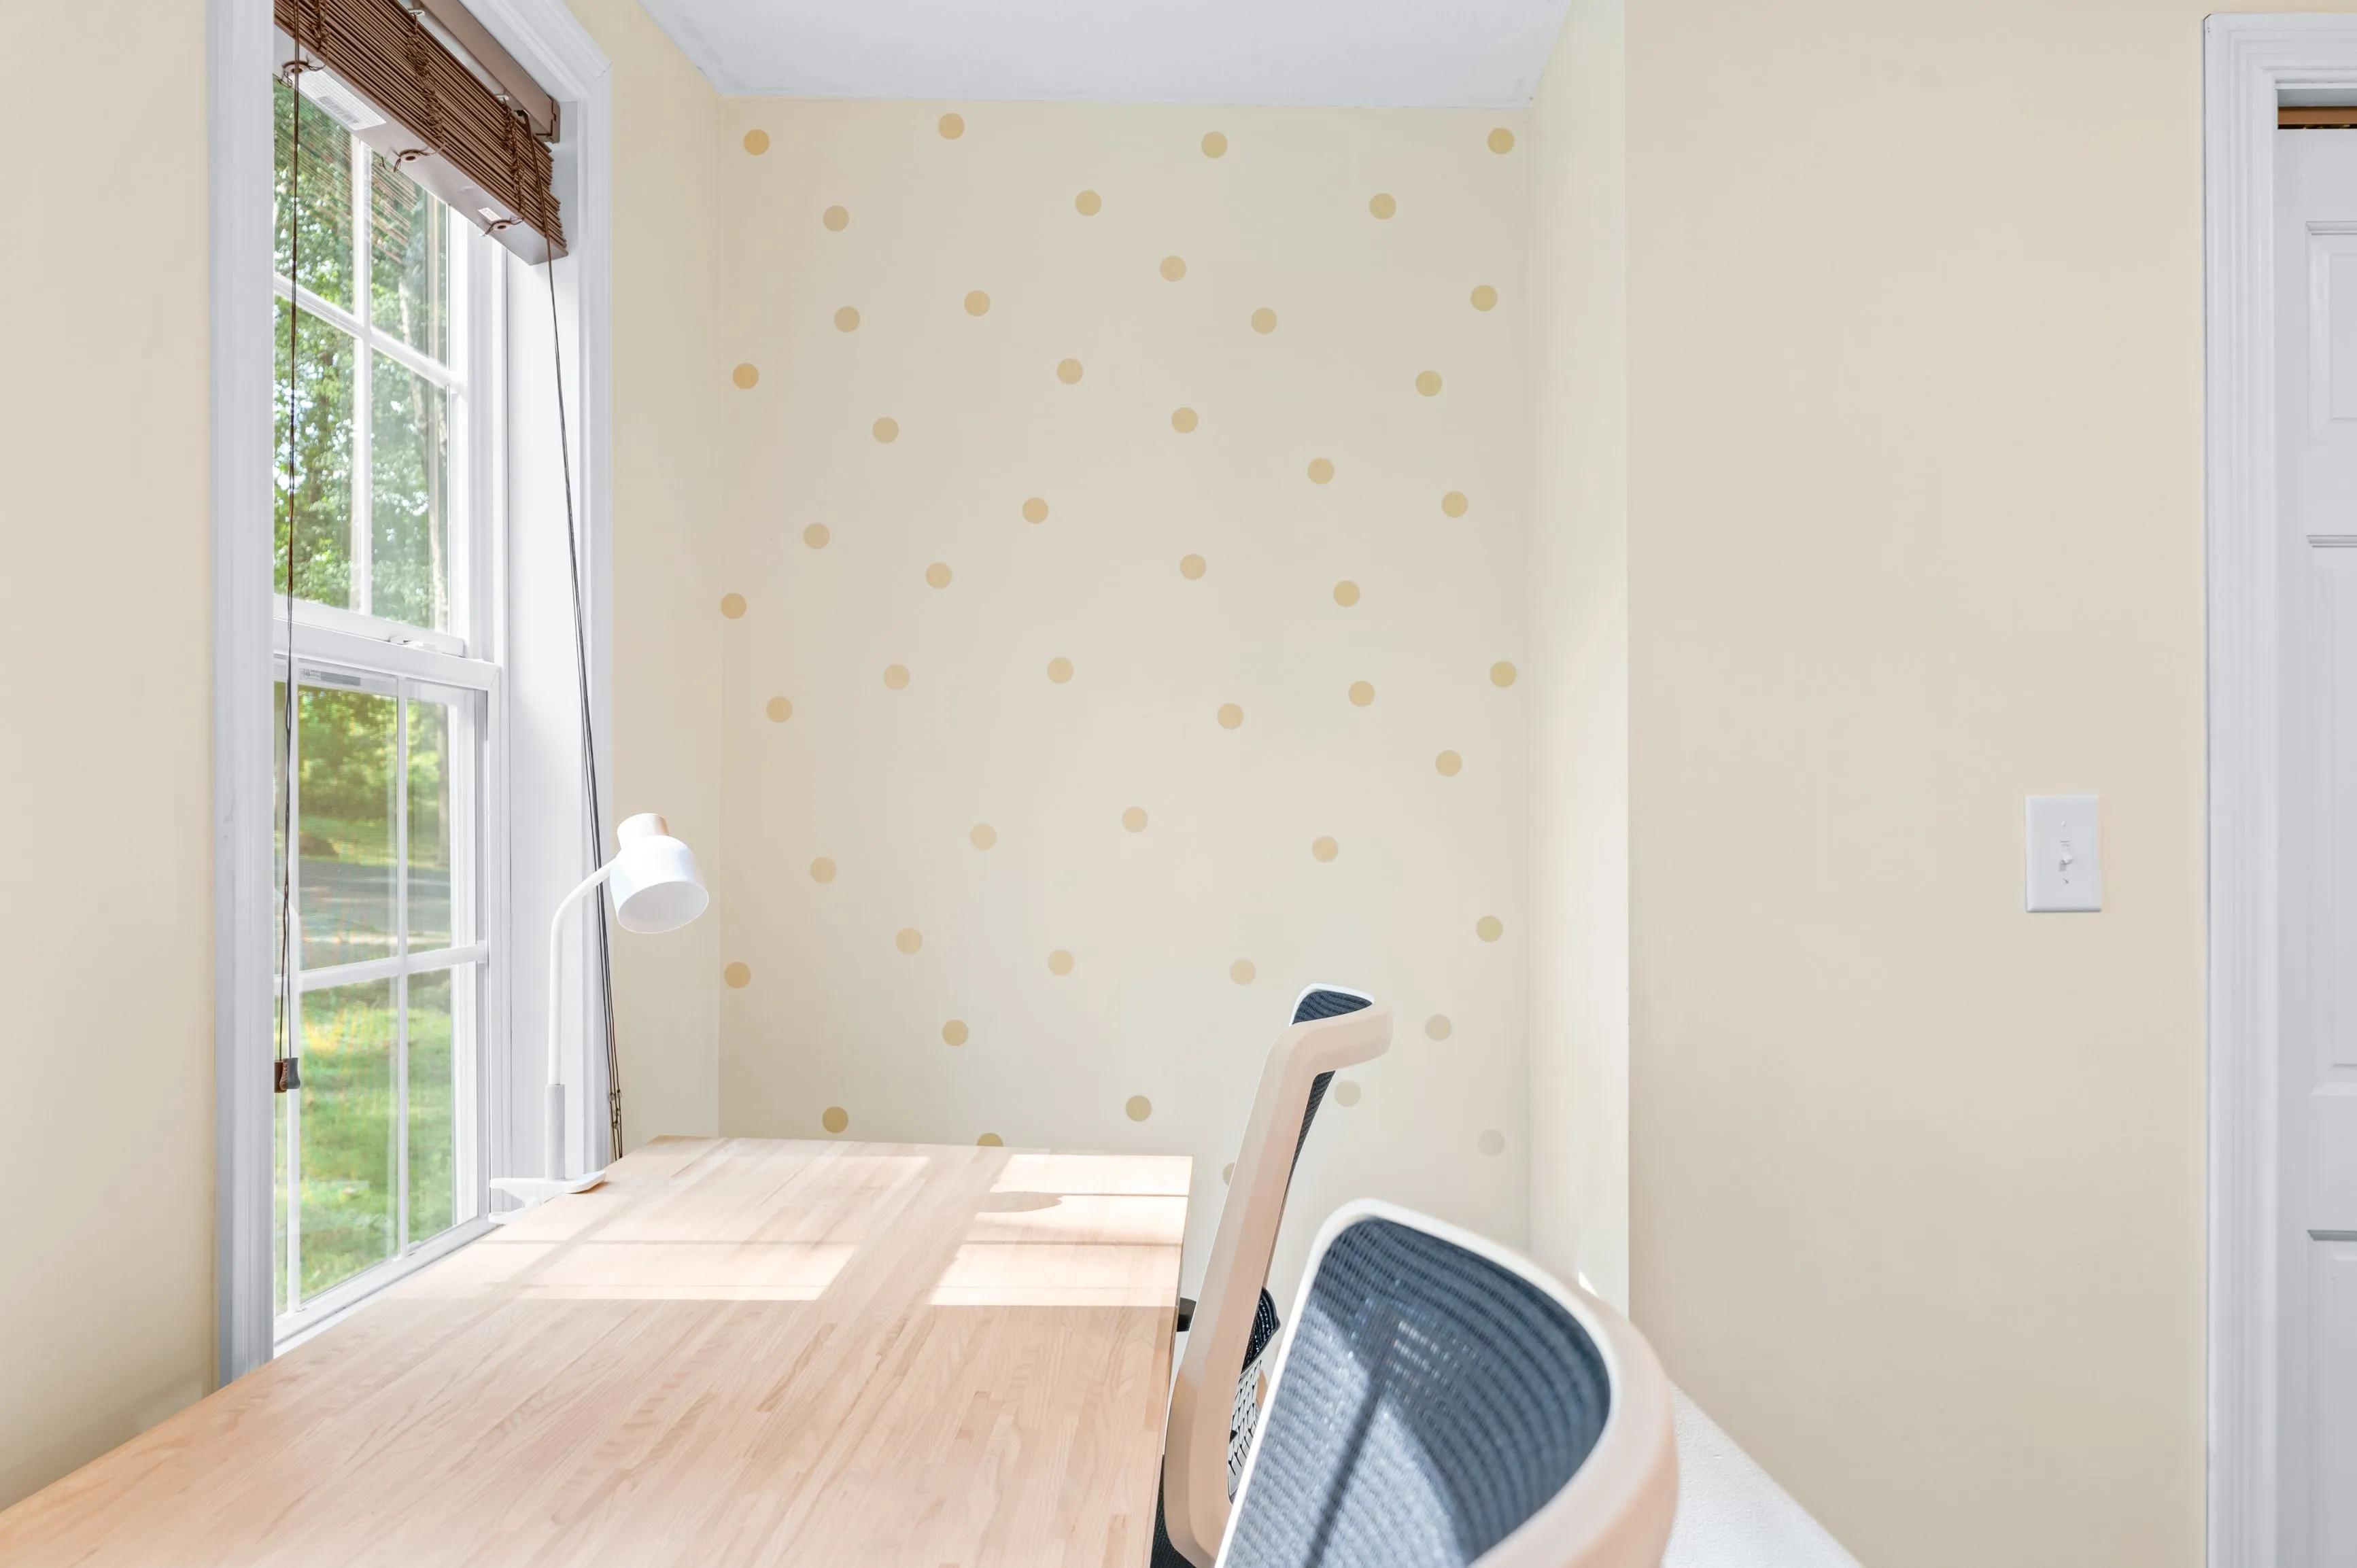 Bright, empty room with floral wallpaper, hardwood floor, and a window allowing natural light in, with a glimpse of a chair and a laundry basket in the foreground.